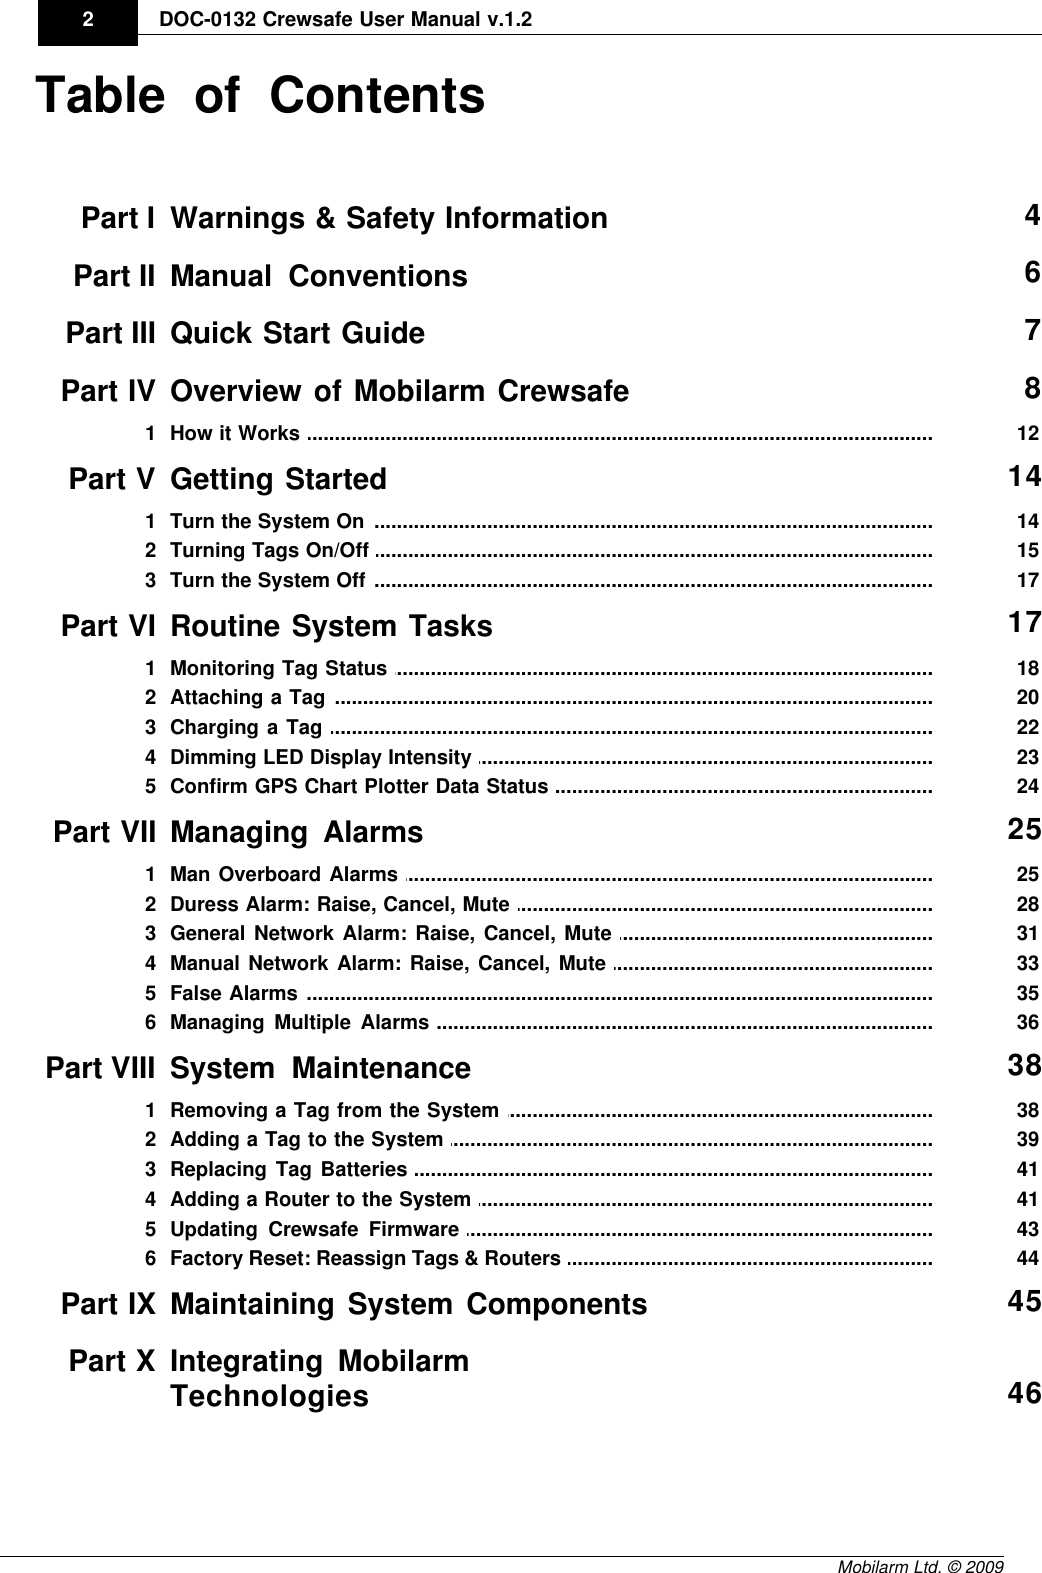 DraftDOC-0132 Crewsafe User Manual v.1.22Mobilarm Ltd. © 2009Table of ContentsPart I Warnings &amp; Safety Information 4Part II Manual Conventions 6Part III Quick Start Guide 7Part IV Overview of Mobilarm Crewsafe 8................................................................................................................................... 121How it Works Part V Getting Started 14................................................................................................................................... 141Turn the System On ................................................................................................................................... 152Turning Tags On/Off ................................................................................................................................... 173Turn the System Off Part VI Routine System Tasks 17................................................................................................................................... 181Monitoring Tag Status ................................................................................................................................... 202Attaching a Tag ................................................................................................................................... 223Charging a Tag ................................................................................................................................... 234Dimming LED Display Intensity ................................................................................................................................... 245Confirm GPS Chart Plotter Data Status Part VII Managing Alarms 25................................................................................................................................... 251Man Overboard Alarms ................................................................................................................................... 282Duress Alarm: Raise, Cancel, Mute ................................................................................................................................... 313General Network Alarm: Raise, Cancel, Mute ................................................................................................................................... 334Manual Network Alarm: Raise, Cancel, Mute ................................................................................................................................... 355False Alarms ................................................................................................................................... 366Managing Multiple Alarms Part VIII System Maintenance 38................................................................................................................................... 381Removing a Tag from the System ................................................................................................................................... 392Adding a Tag to the System ................................................................................................................................... 413Replacing Tag Batteries ................................................................................................................................... 414Adding a Router to the System ................................................................................................................................... 435Updating Crewsafe Firmware ................................................................................................................................... 446Factory Reset: Reassign Tags &amp; Routers Part IX Maintaining System Components 45Part X Integrating MobilarmTechnologies 46